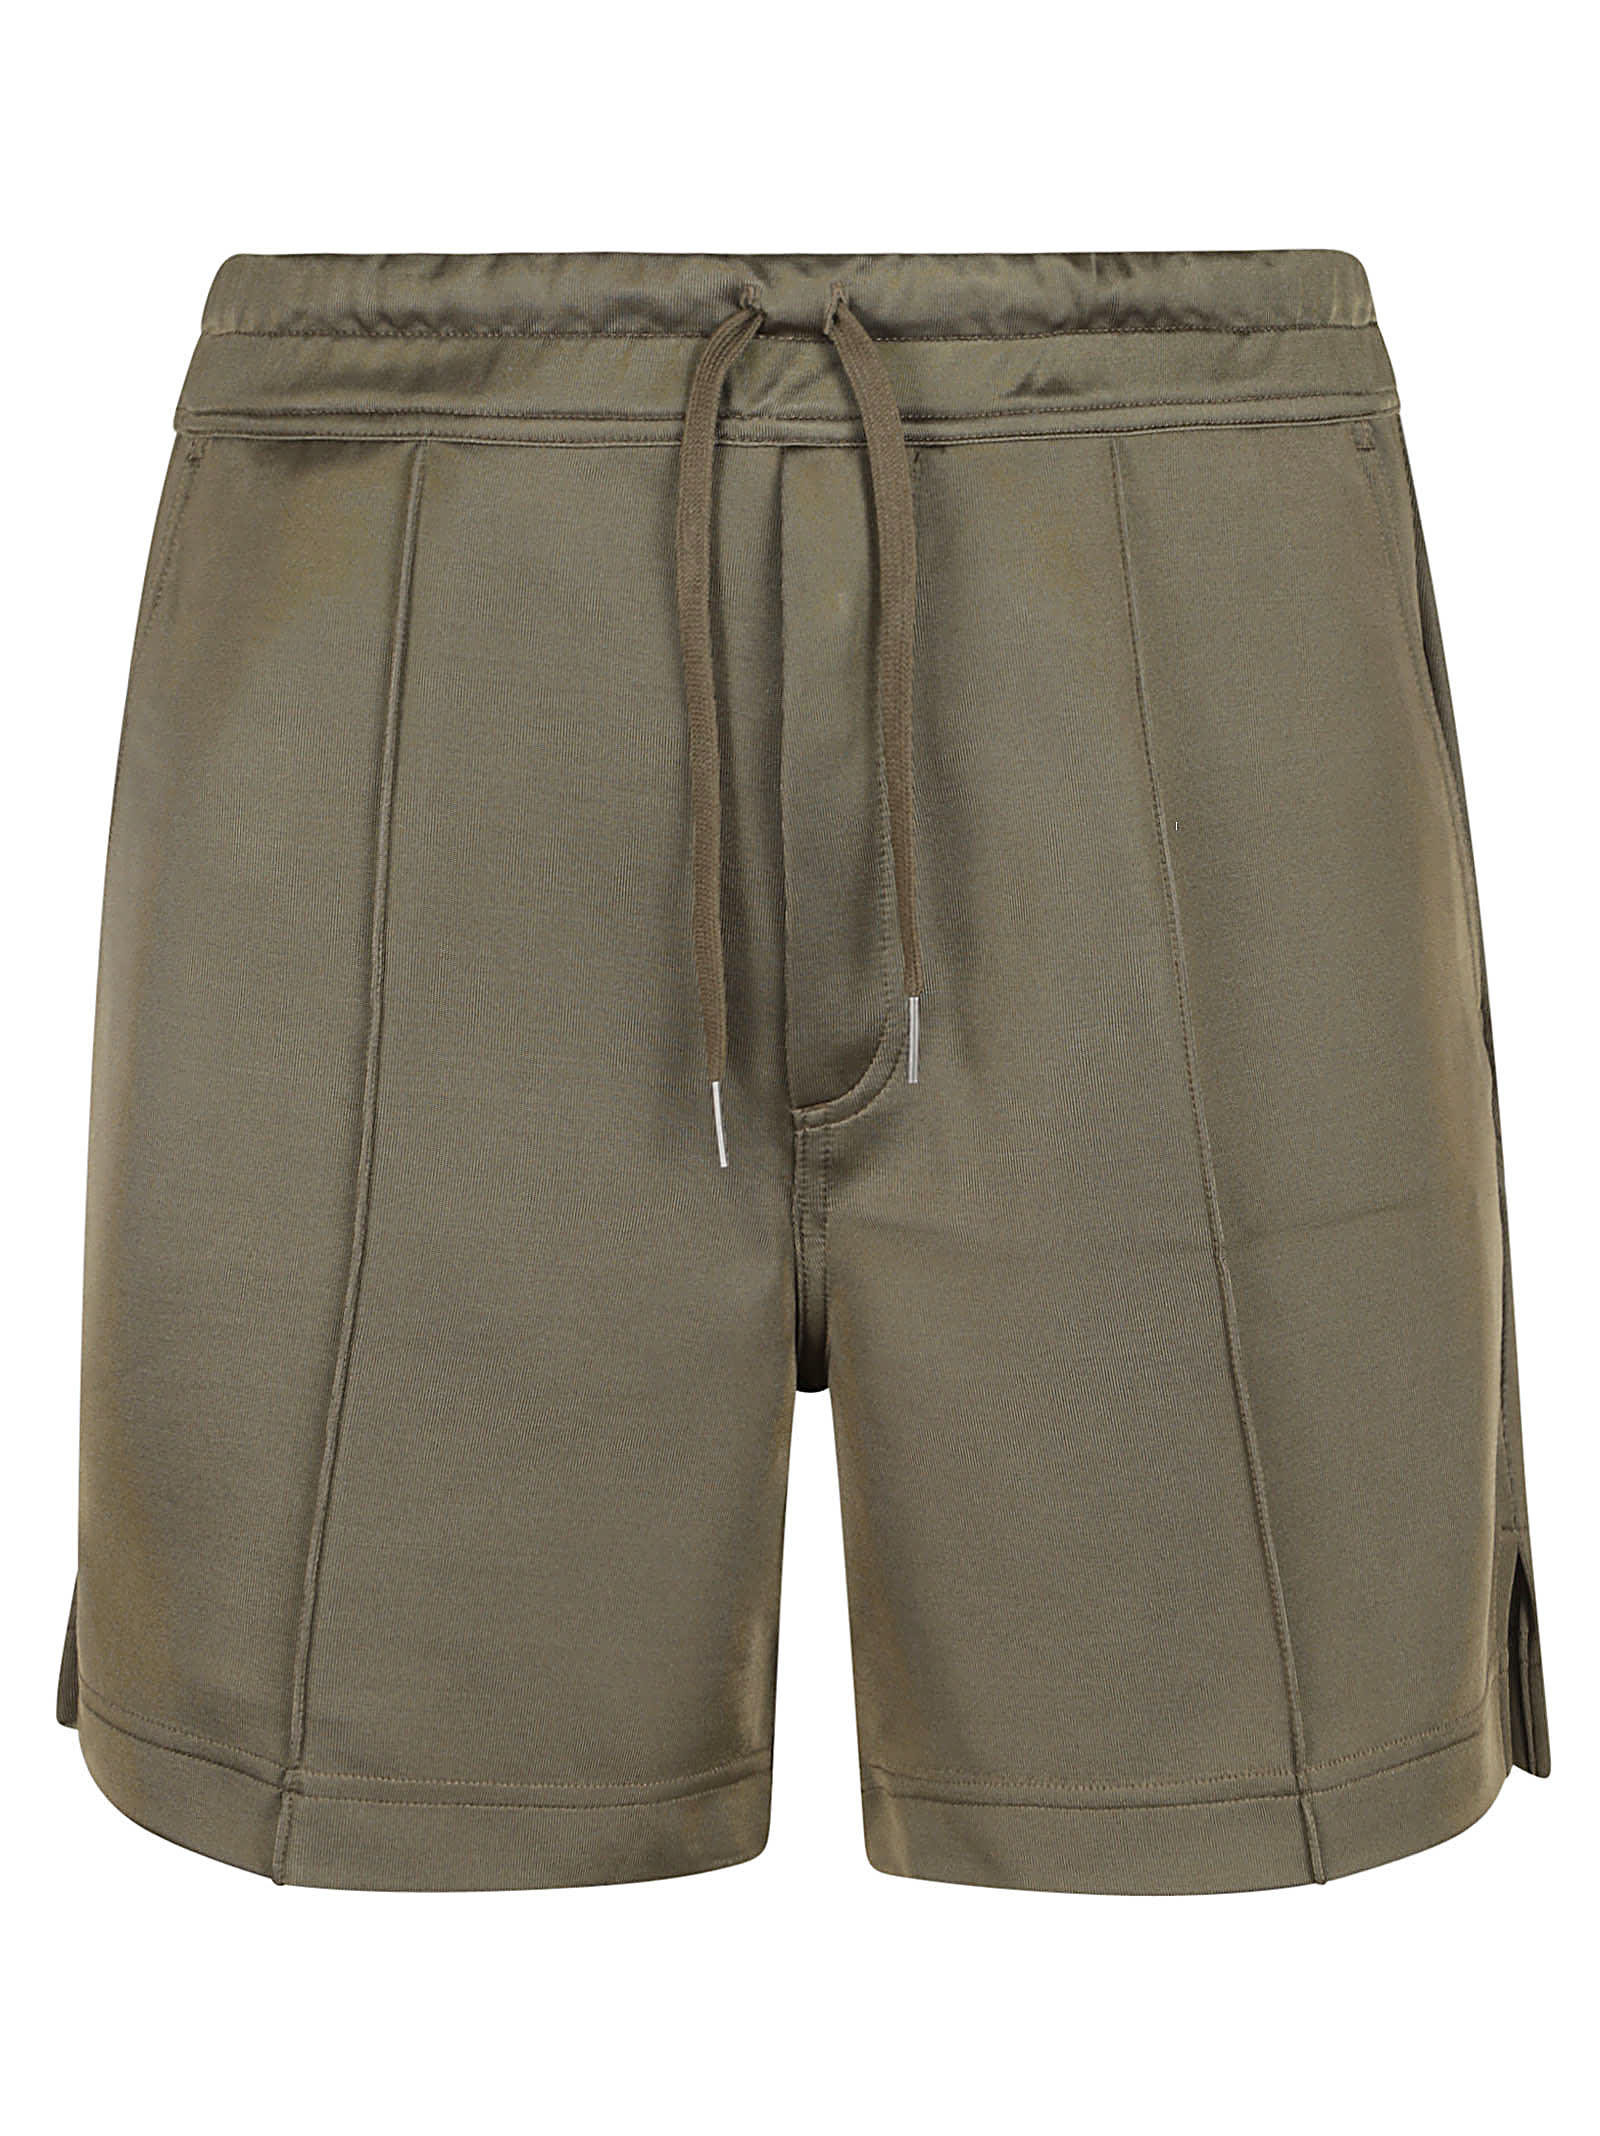 Tom Ford Lace-up Shorts